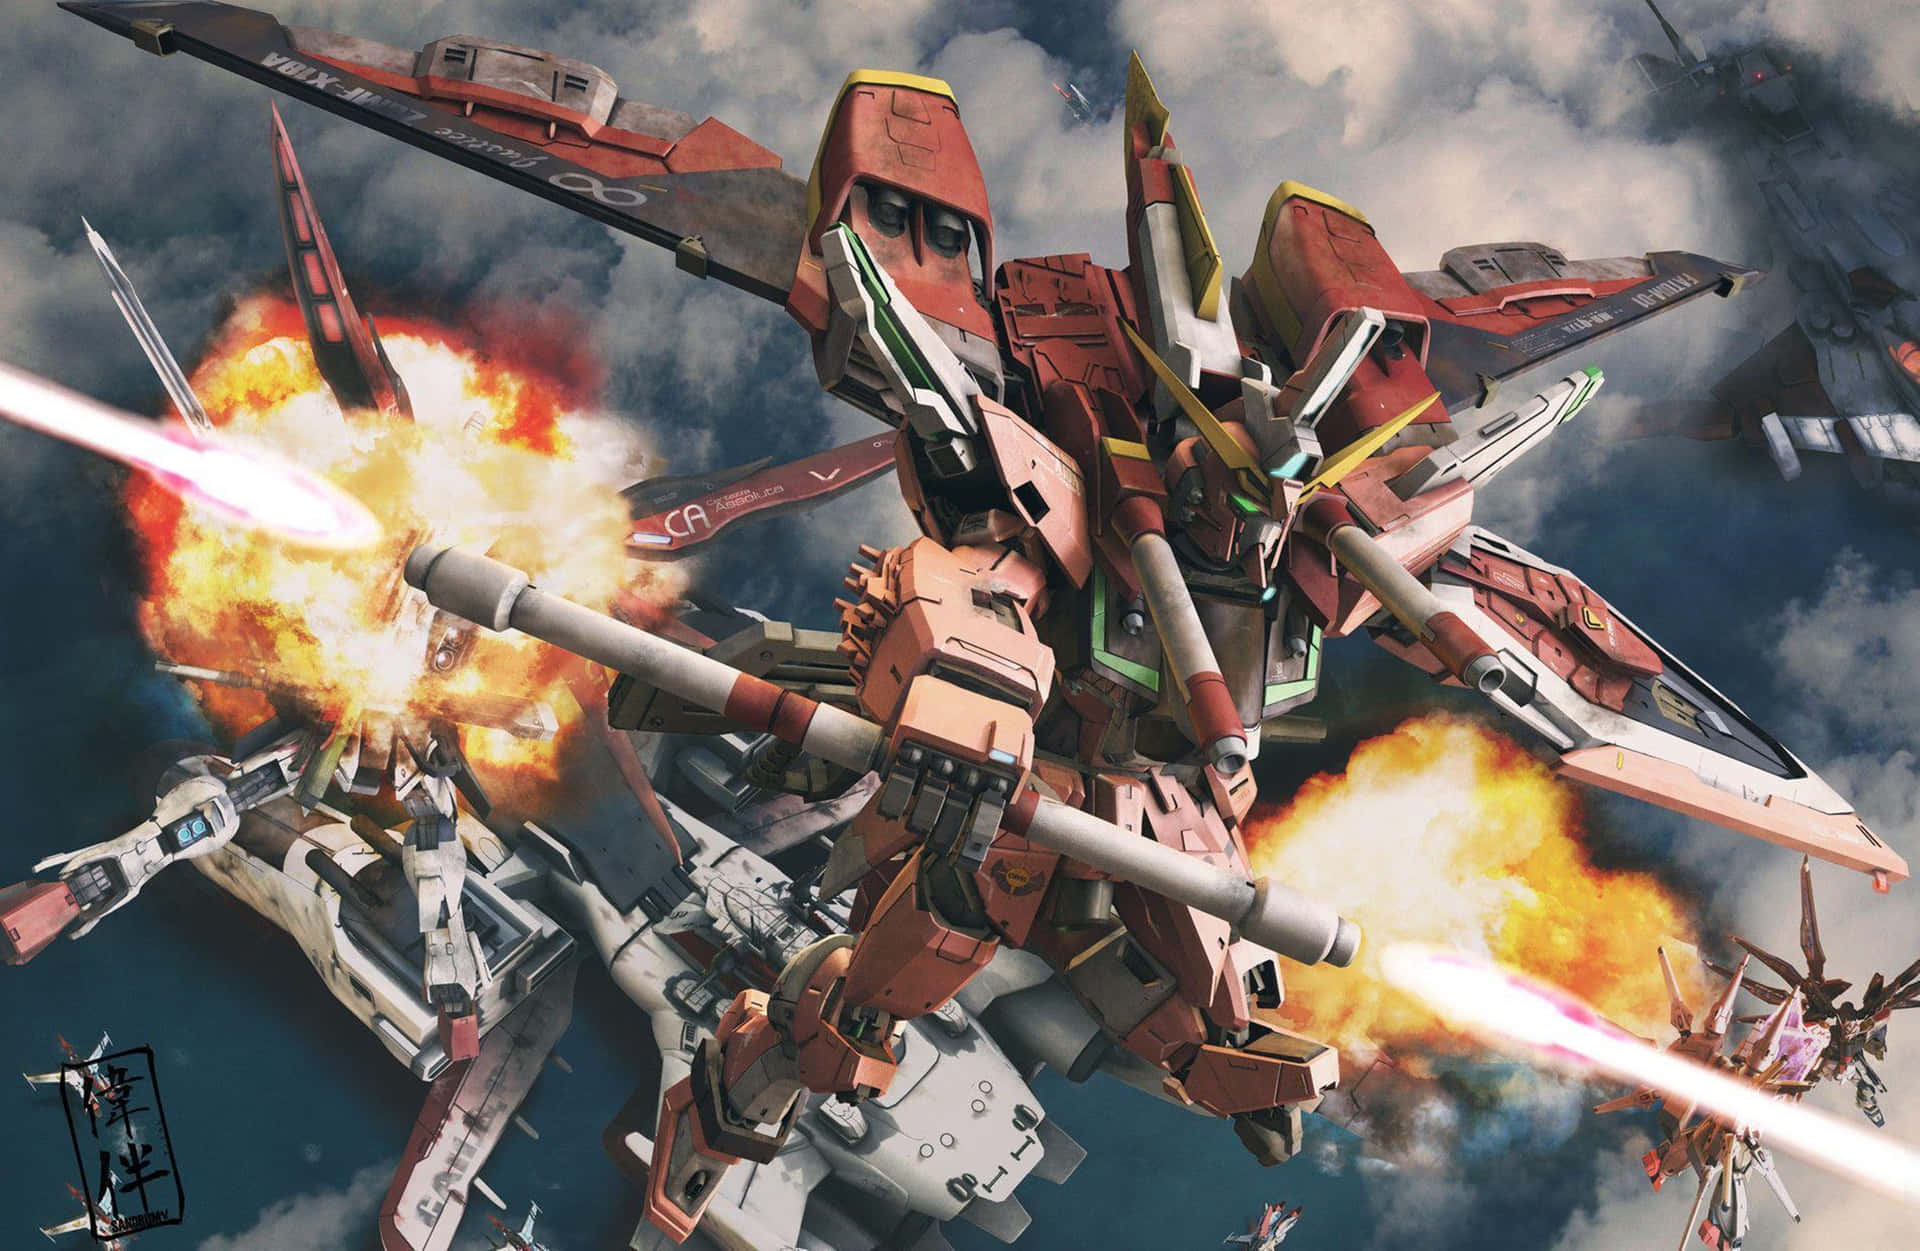 "Witness the Incredible Might of the Gundam In All of Its 4K Glory" Wallpaper